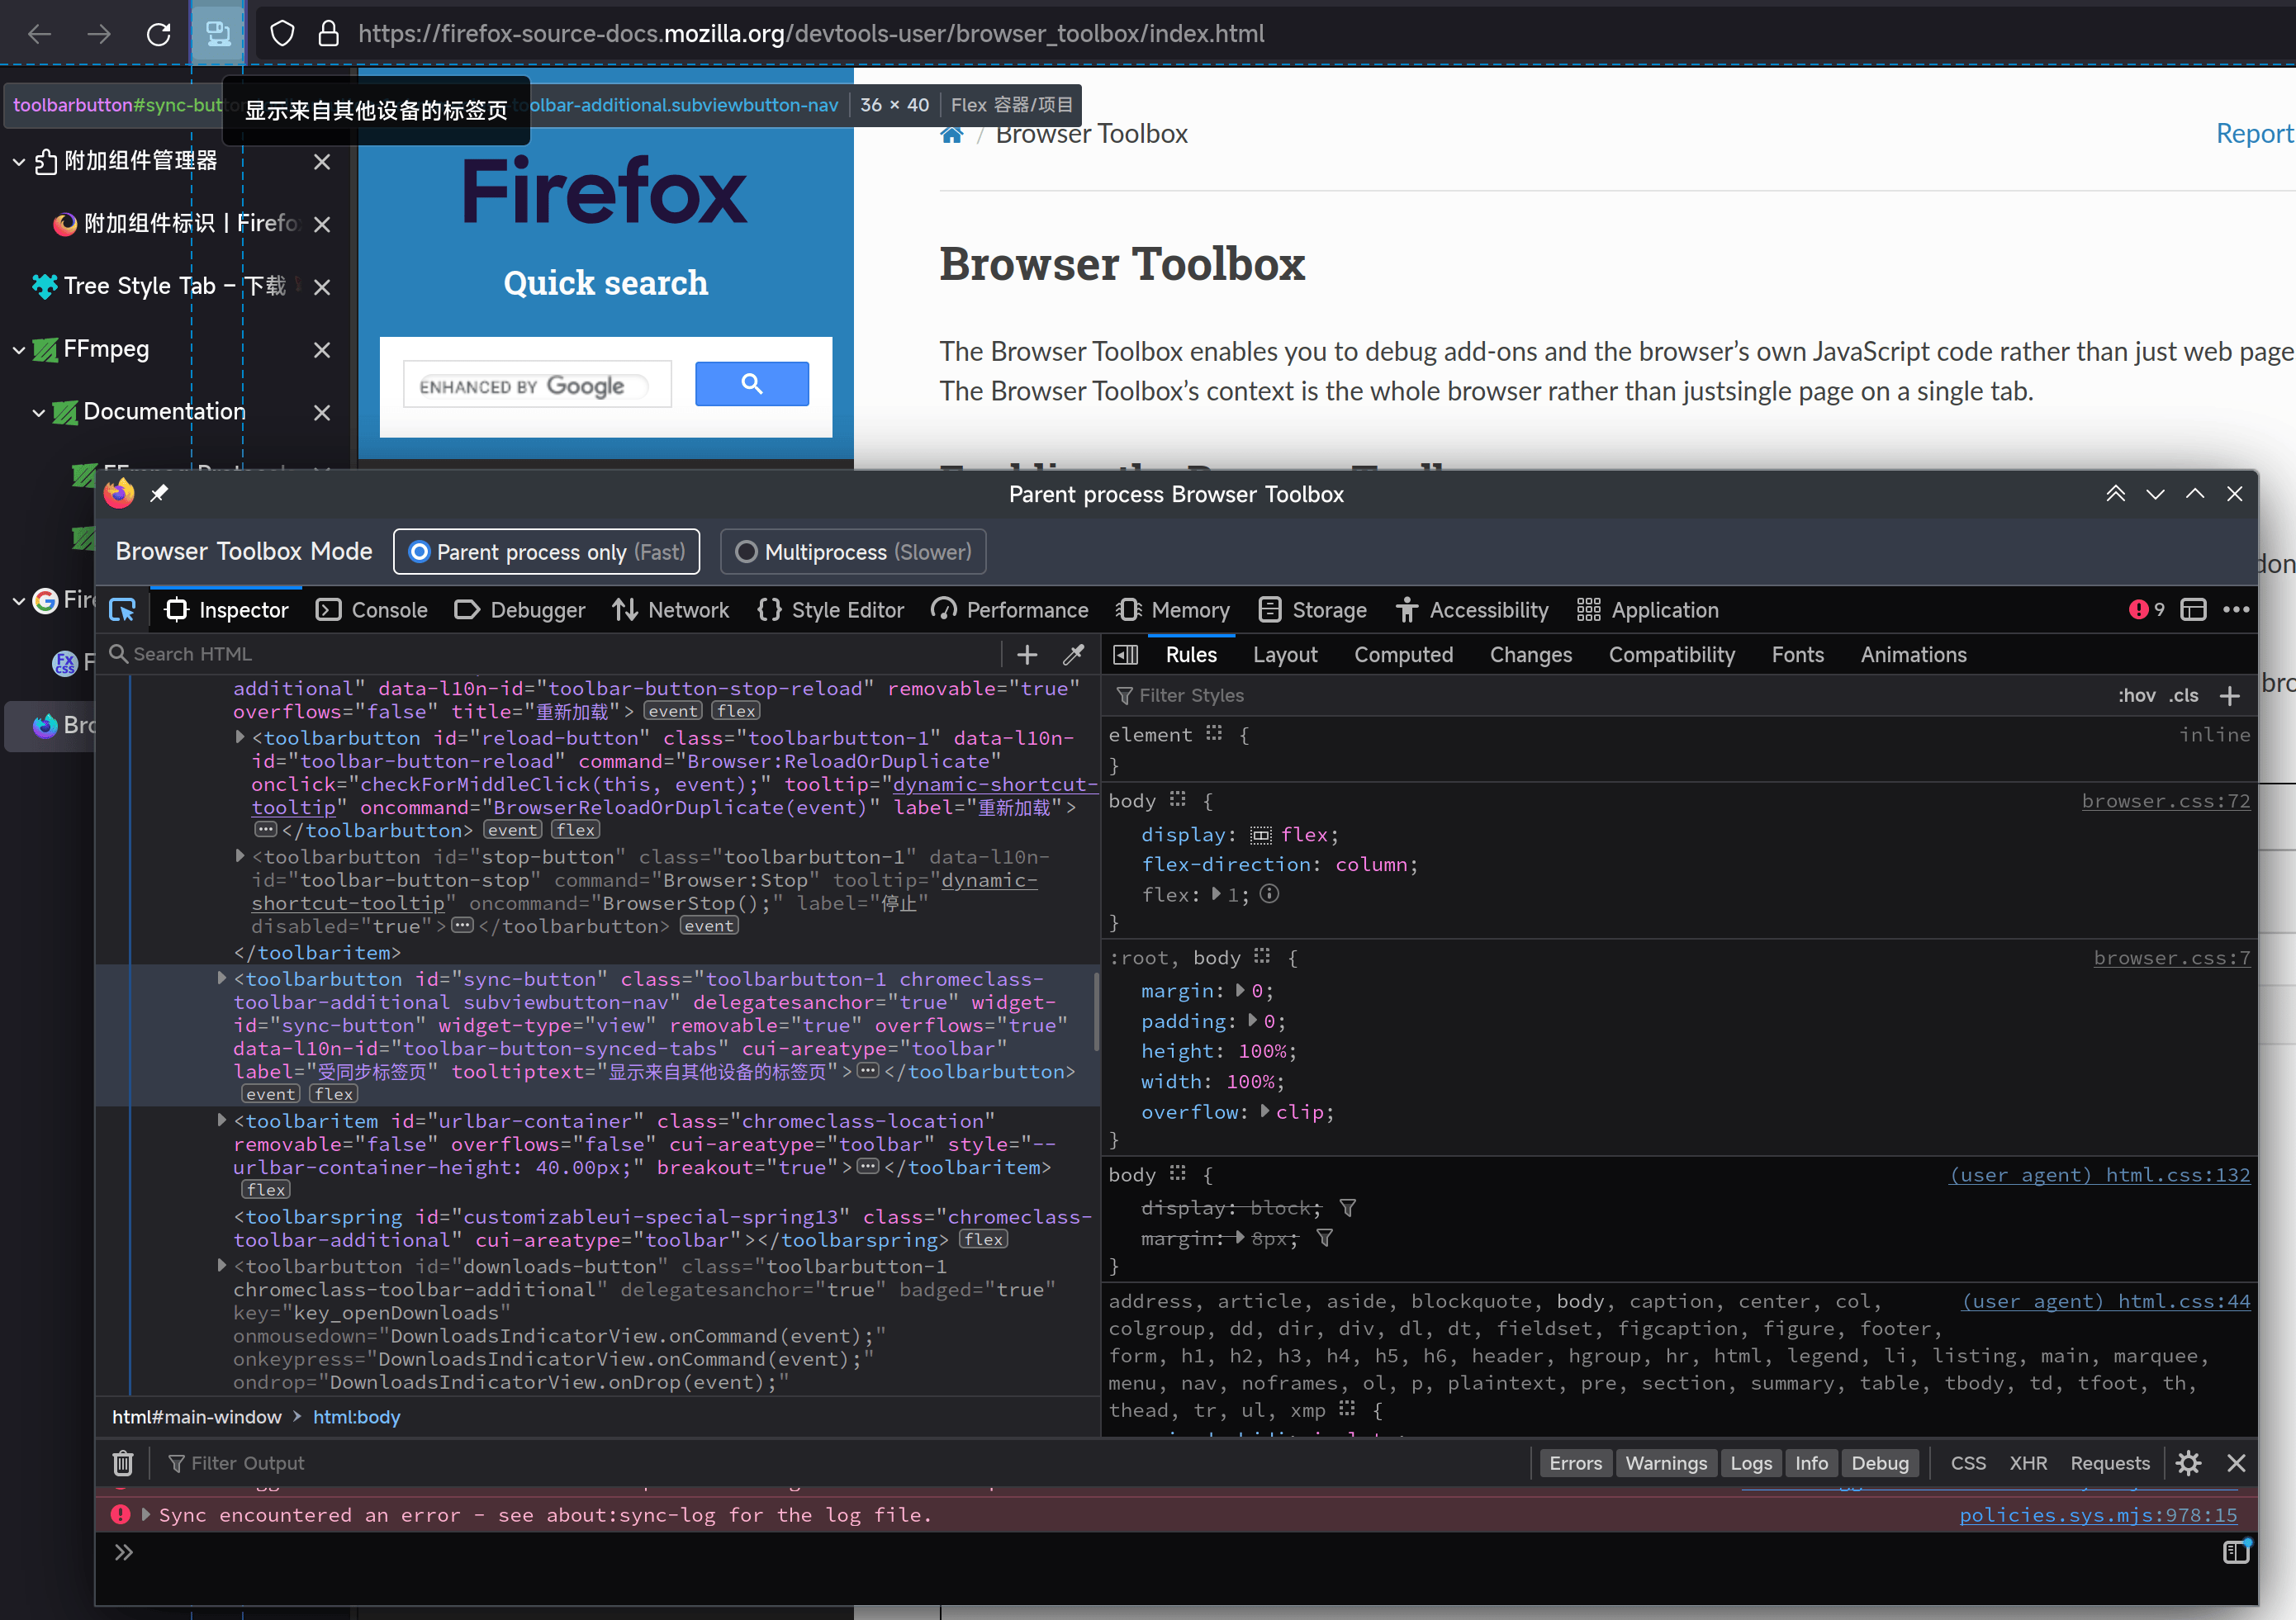 Firefox Browser Toolbox